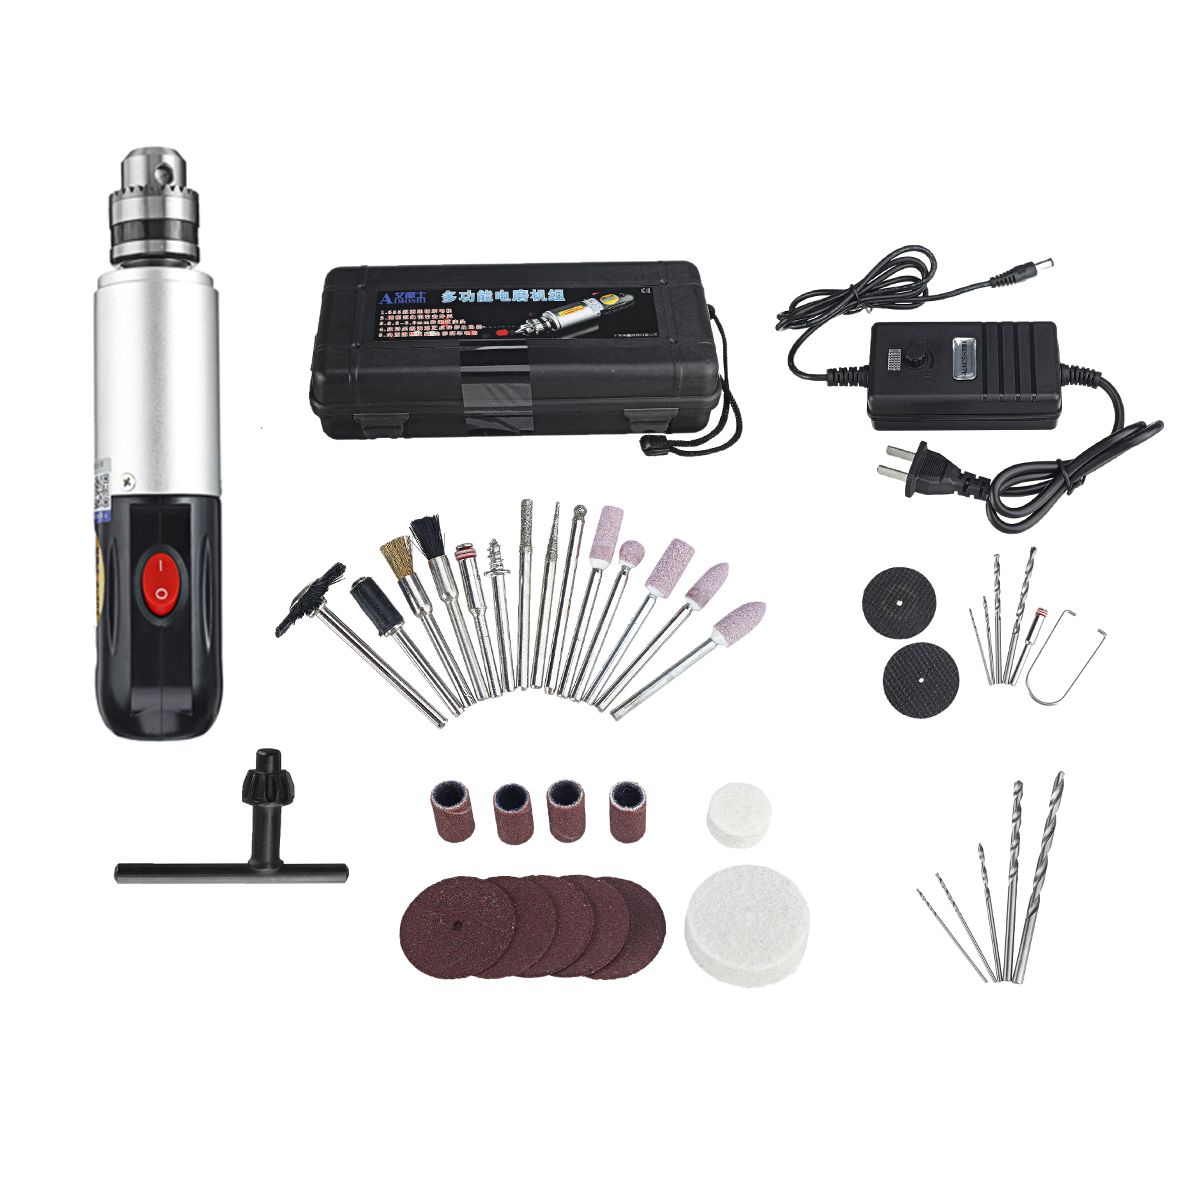 220V-72W-Micro-Electric-Hand-Drill-Adjustable-Variable-Speed-Electric-Grinder-with-33pcs-Tool-Access-1110910